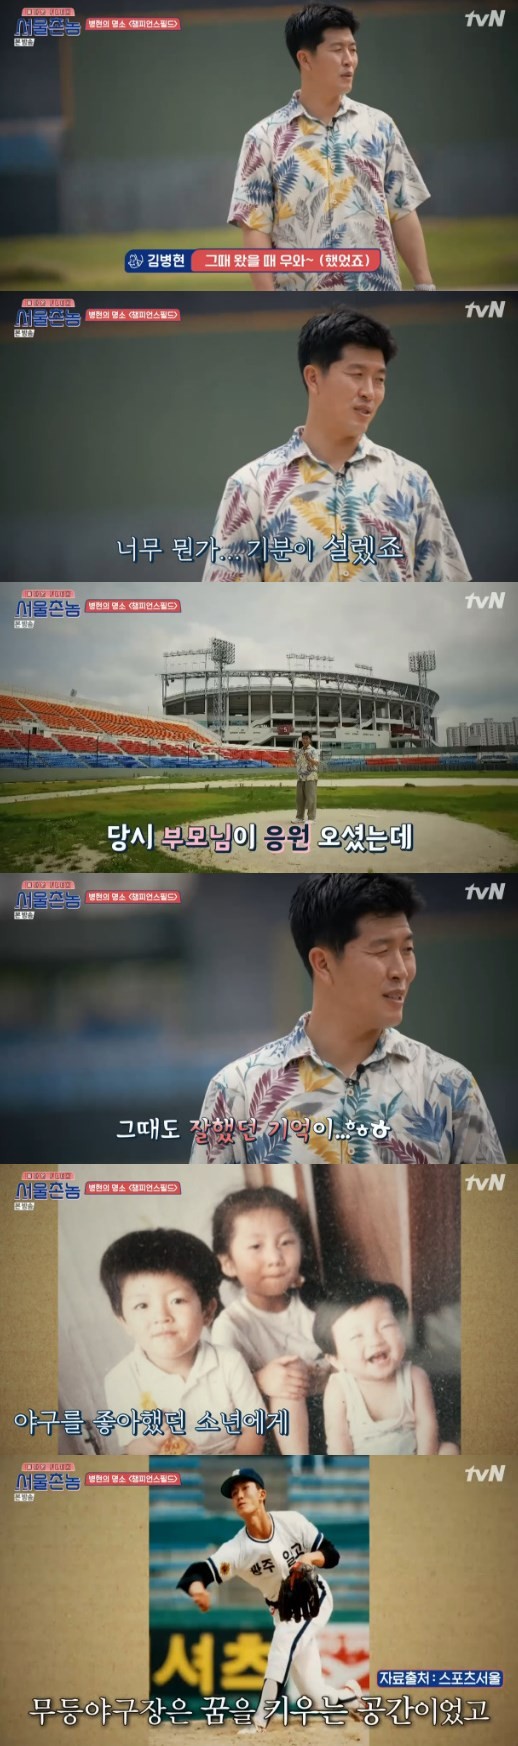 Hometown Flex  Kim Byung-hyun, a professional baseball player, recalled memories of Gwangju Mudeung Stadium.On the 26th cable channel tvN Hometown Flex, Cha Tae-hyun and Lee Seung-gi appeared in Yunho, Kim Byung-hyun and Hong Jin-young.Cha Tae-hyun and Lee Seung-gi met Hong Jin-young, Yunho and Kim Byung-hyun as Gwangju at Champions Field.Cha Tae-hyun, who likes baseball, said Kim Byung-hyun calls him his brother, and Cha Tae-hyun was thrilled that BK is my brother. It is an honor.Kim Byung-hyun commented on Gwangju Gwangju Mudeung Stadium: It is a place where memories are from elementary school to high school.This is the Holy Land in the city of Gwangju, he noted.Furthermore, he said, The first place I played was Gwangju Mudeung Stadium.When I came, there were Tigers players and I felt like I was feeling. He said, At that time, my parents came and I seemed to have done well. Kim Byung-hyun added: Its where I grew my dream, Id say its like an incubator, where the baby made it possible to meet the world.Since then, I have learned the dialect of my hometown Gwangju.Gwangju dialect I have a relationship meaning to quizzes.Yunho, Kim Byung-hyun, and Hong Jin-young, who heard I am a friend, went into the situation explanation at once, saying, You are a real friend.In the meantime, Hong Jin-young asked the restaurant owner, Who is dating here? And the restaurant owner said, Our uncle is the best uncle. Lee Seung-gi and Cha Tae-hyun were embarrassed.But Kim Byung-hyun smiled brightly and laughed.Cha Tae-hyun wrote cute; the restaurant aunt who saw it said, Its not a handsome, pretty face, its a little pretty, but its ugly.It is a Gwangju dialect that is not particularly beautiful or not, but it is getting more and more interested in the snow.On the other hand, Hometown Flex is broadcast every Sunday at 10:50 pm.